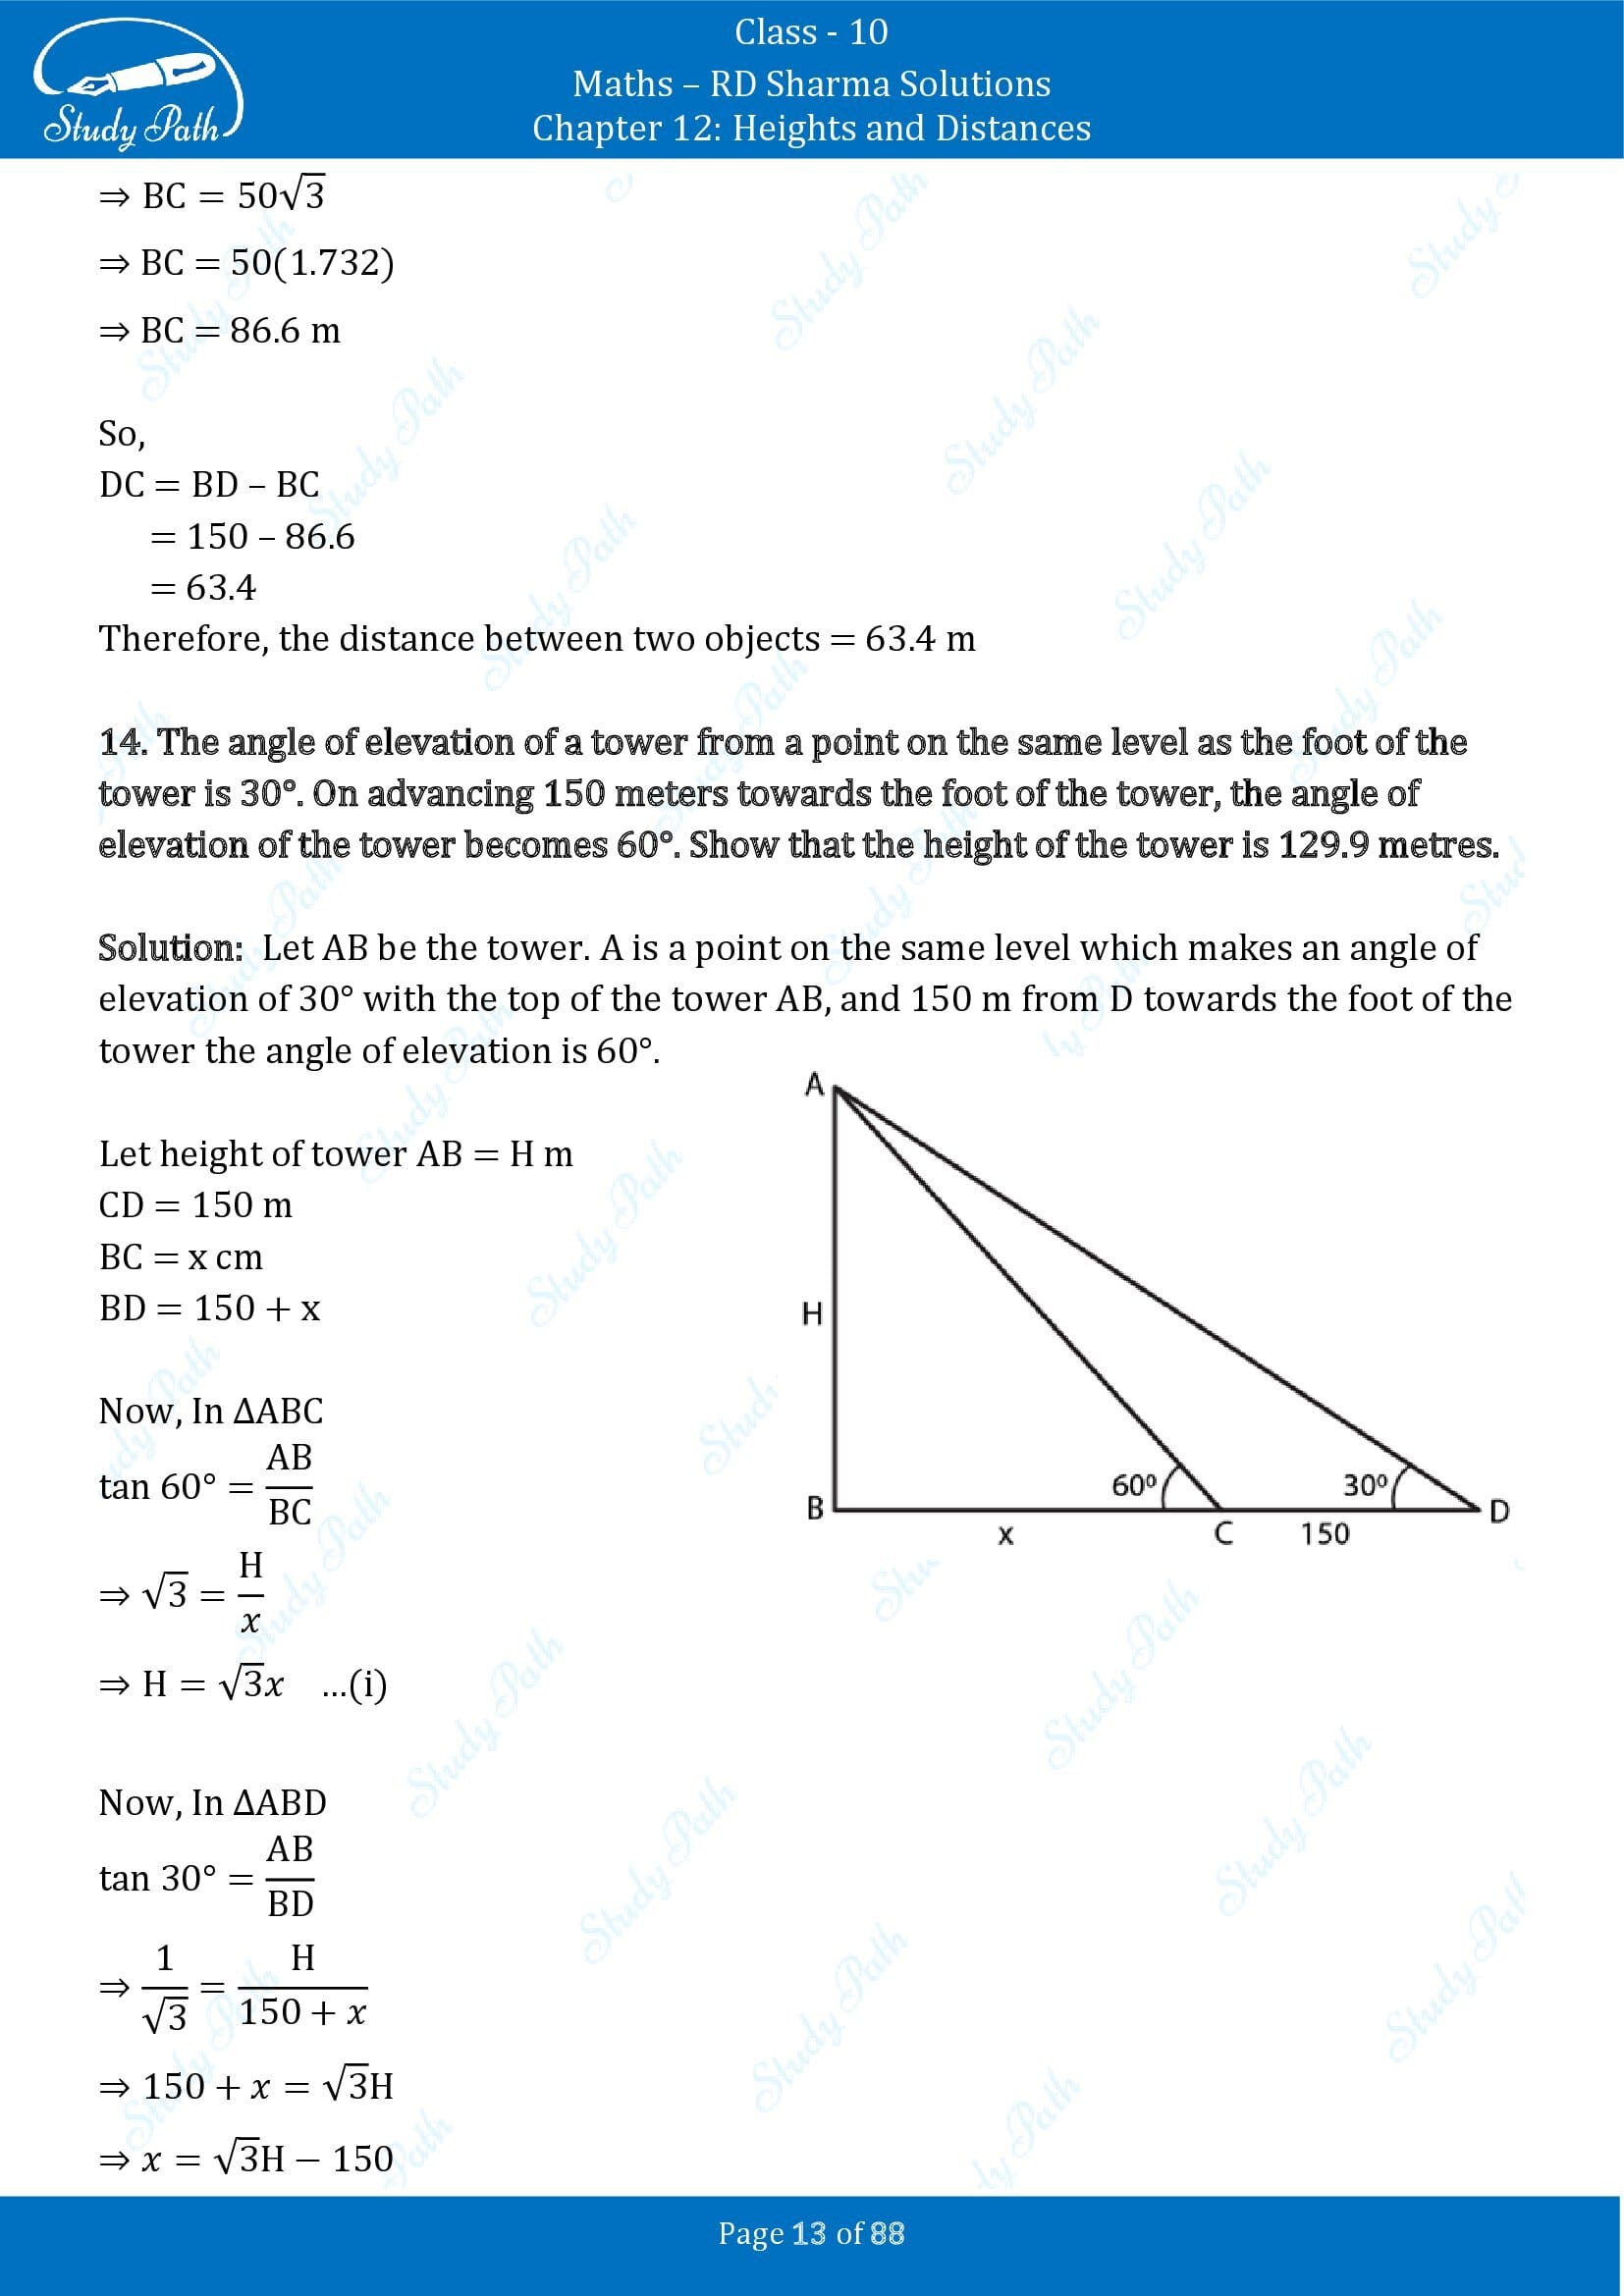 RD Sharma Solutions Class 10 Chapter 12 Heights and Distances Exercise 12.1 00013